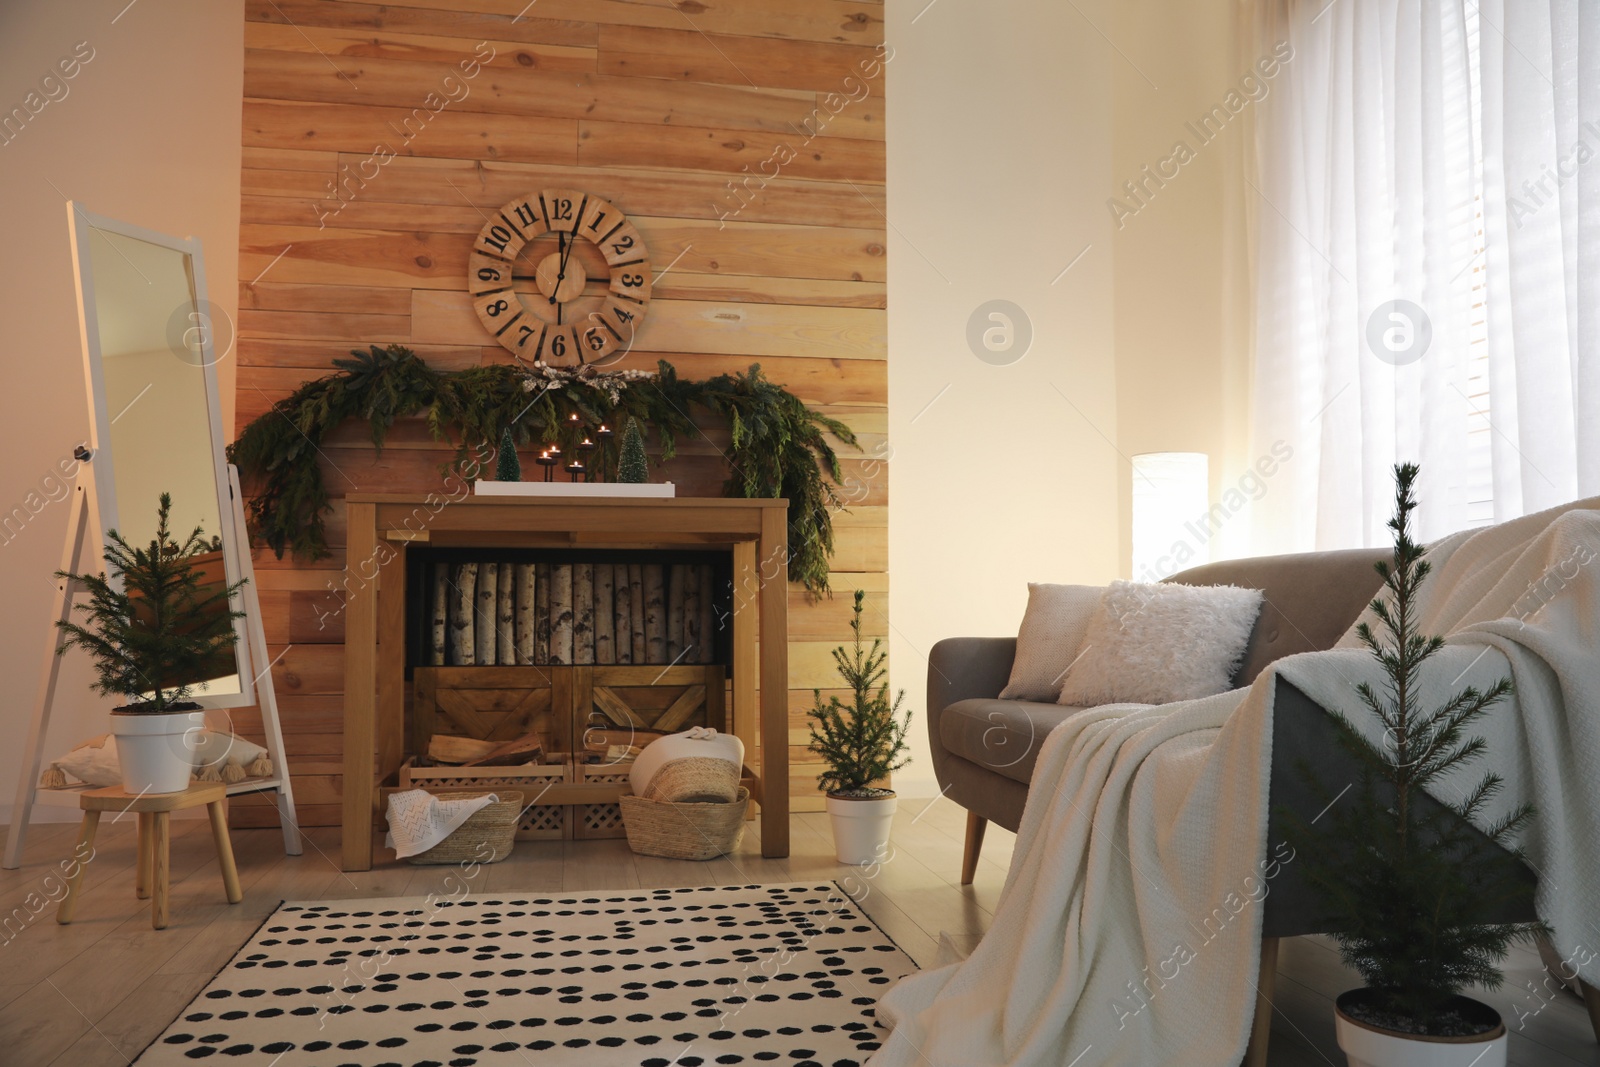 Photo of Cozy room interior with console table and conifer garland near wooden wall